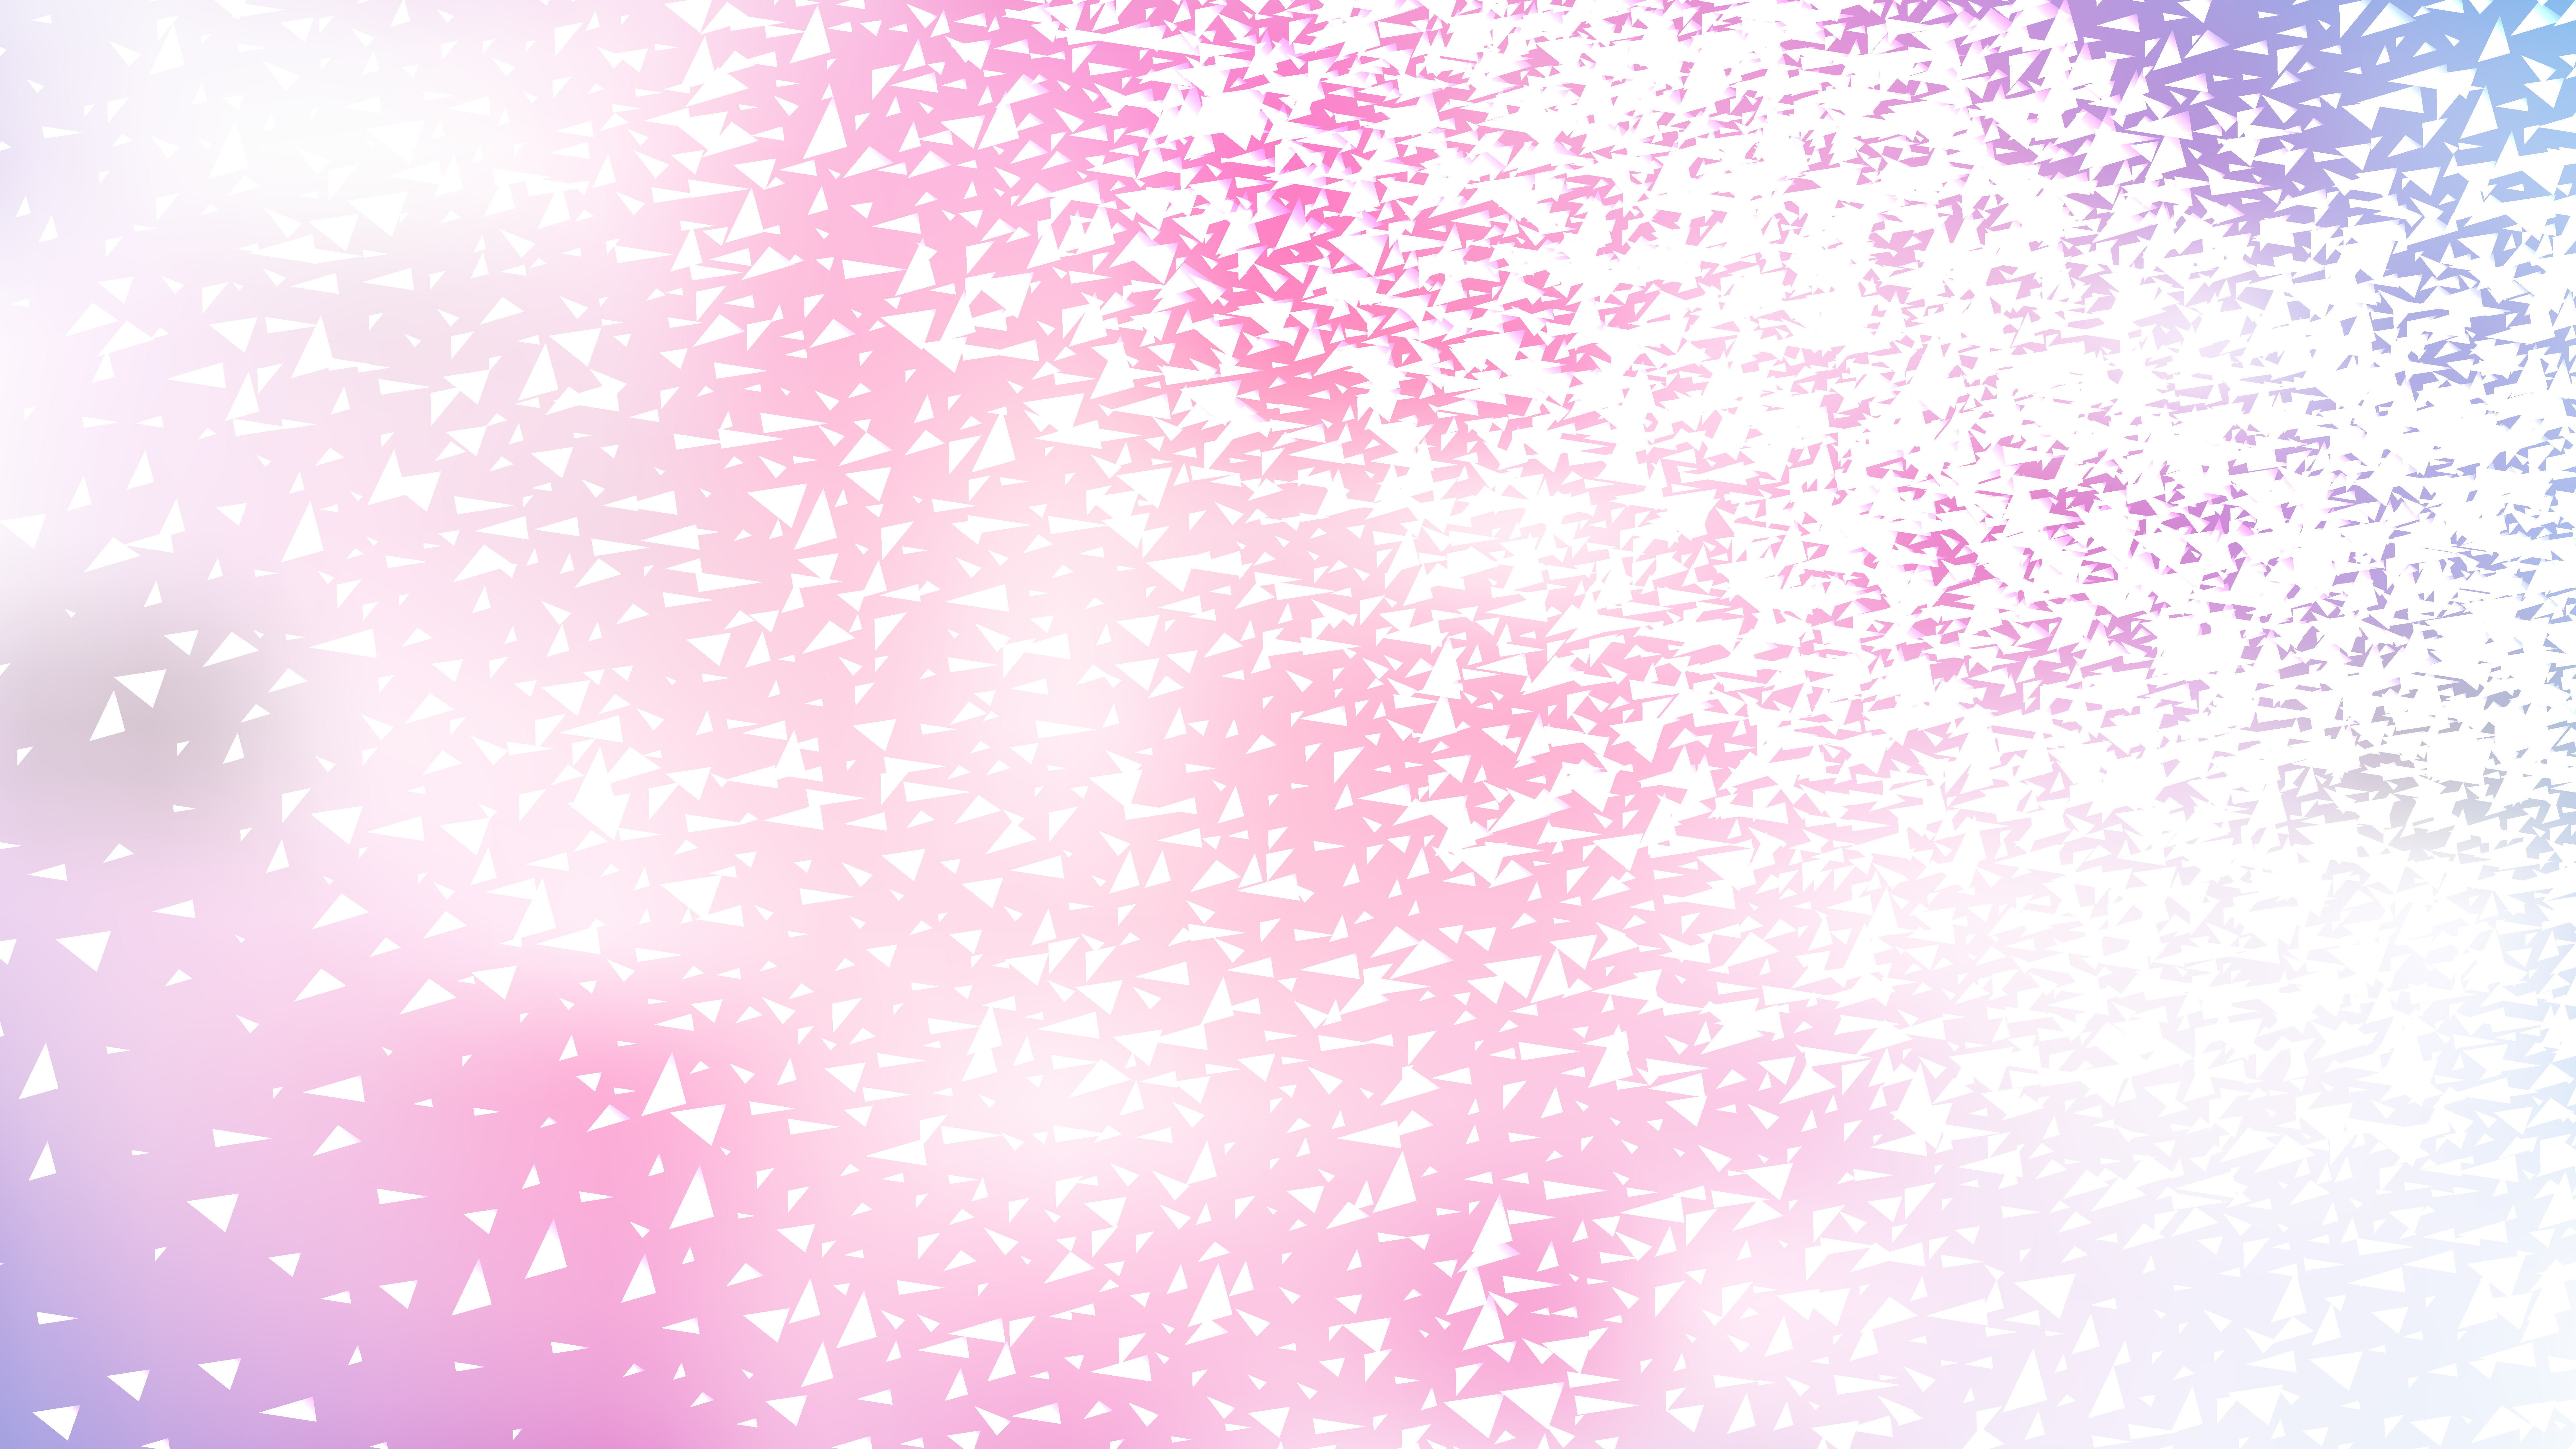 Free Pink and White Sparkling Glitter Background 8000x4500